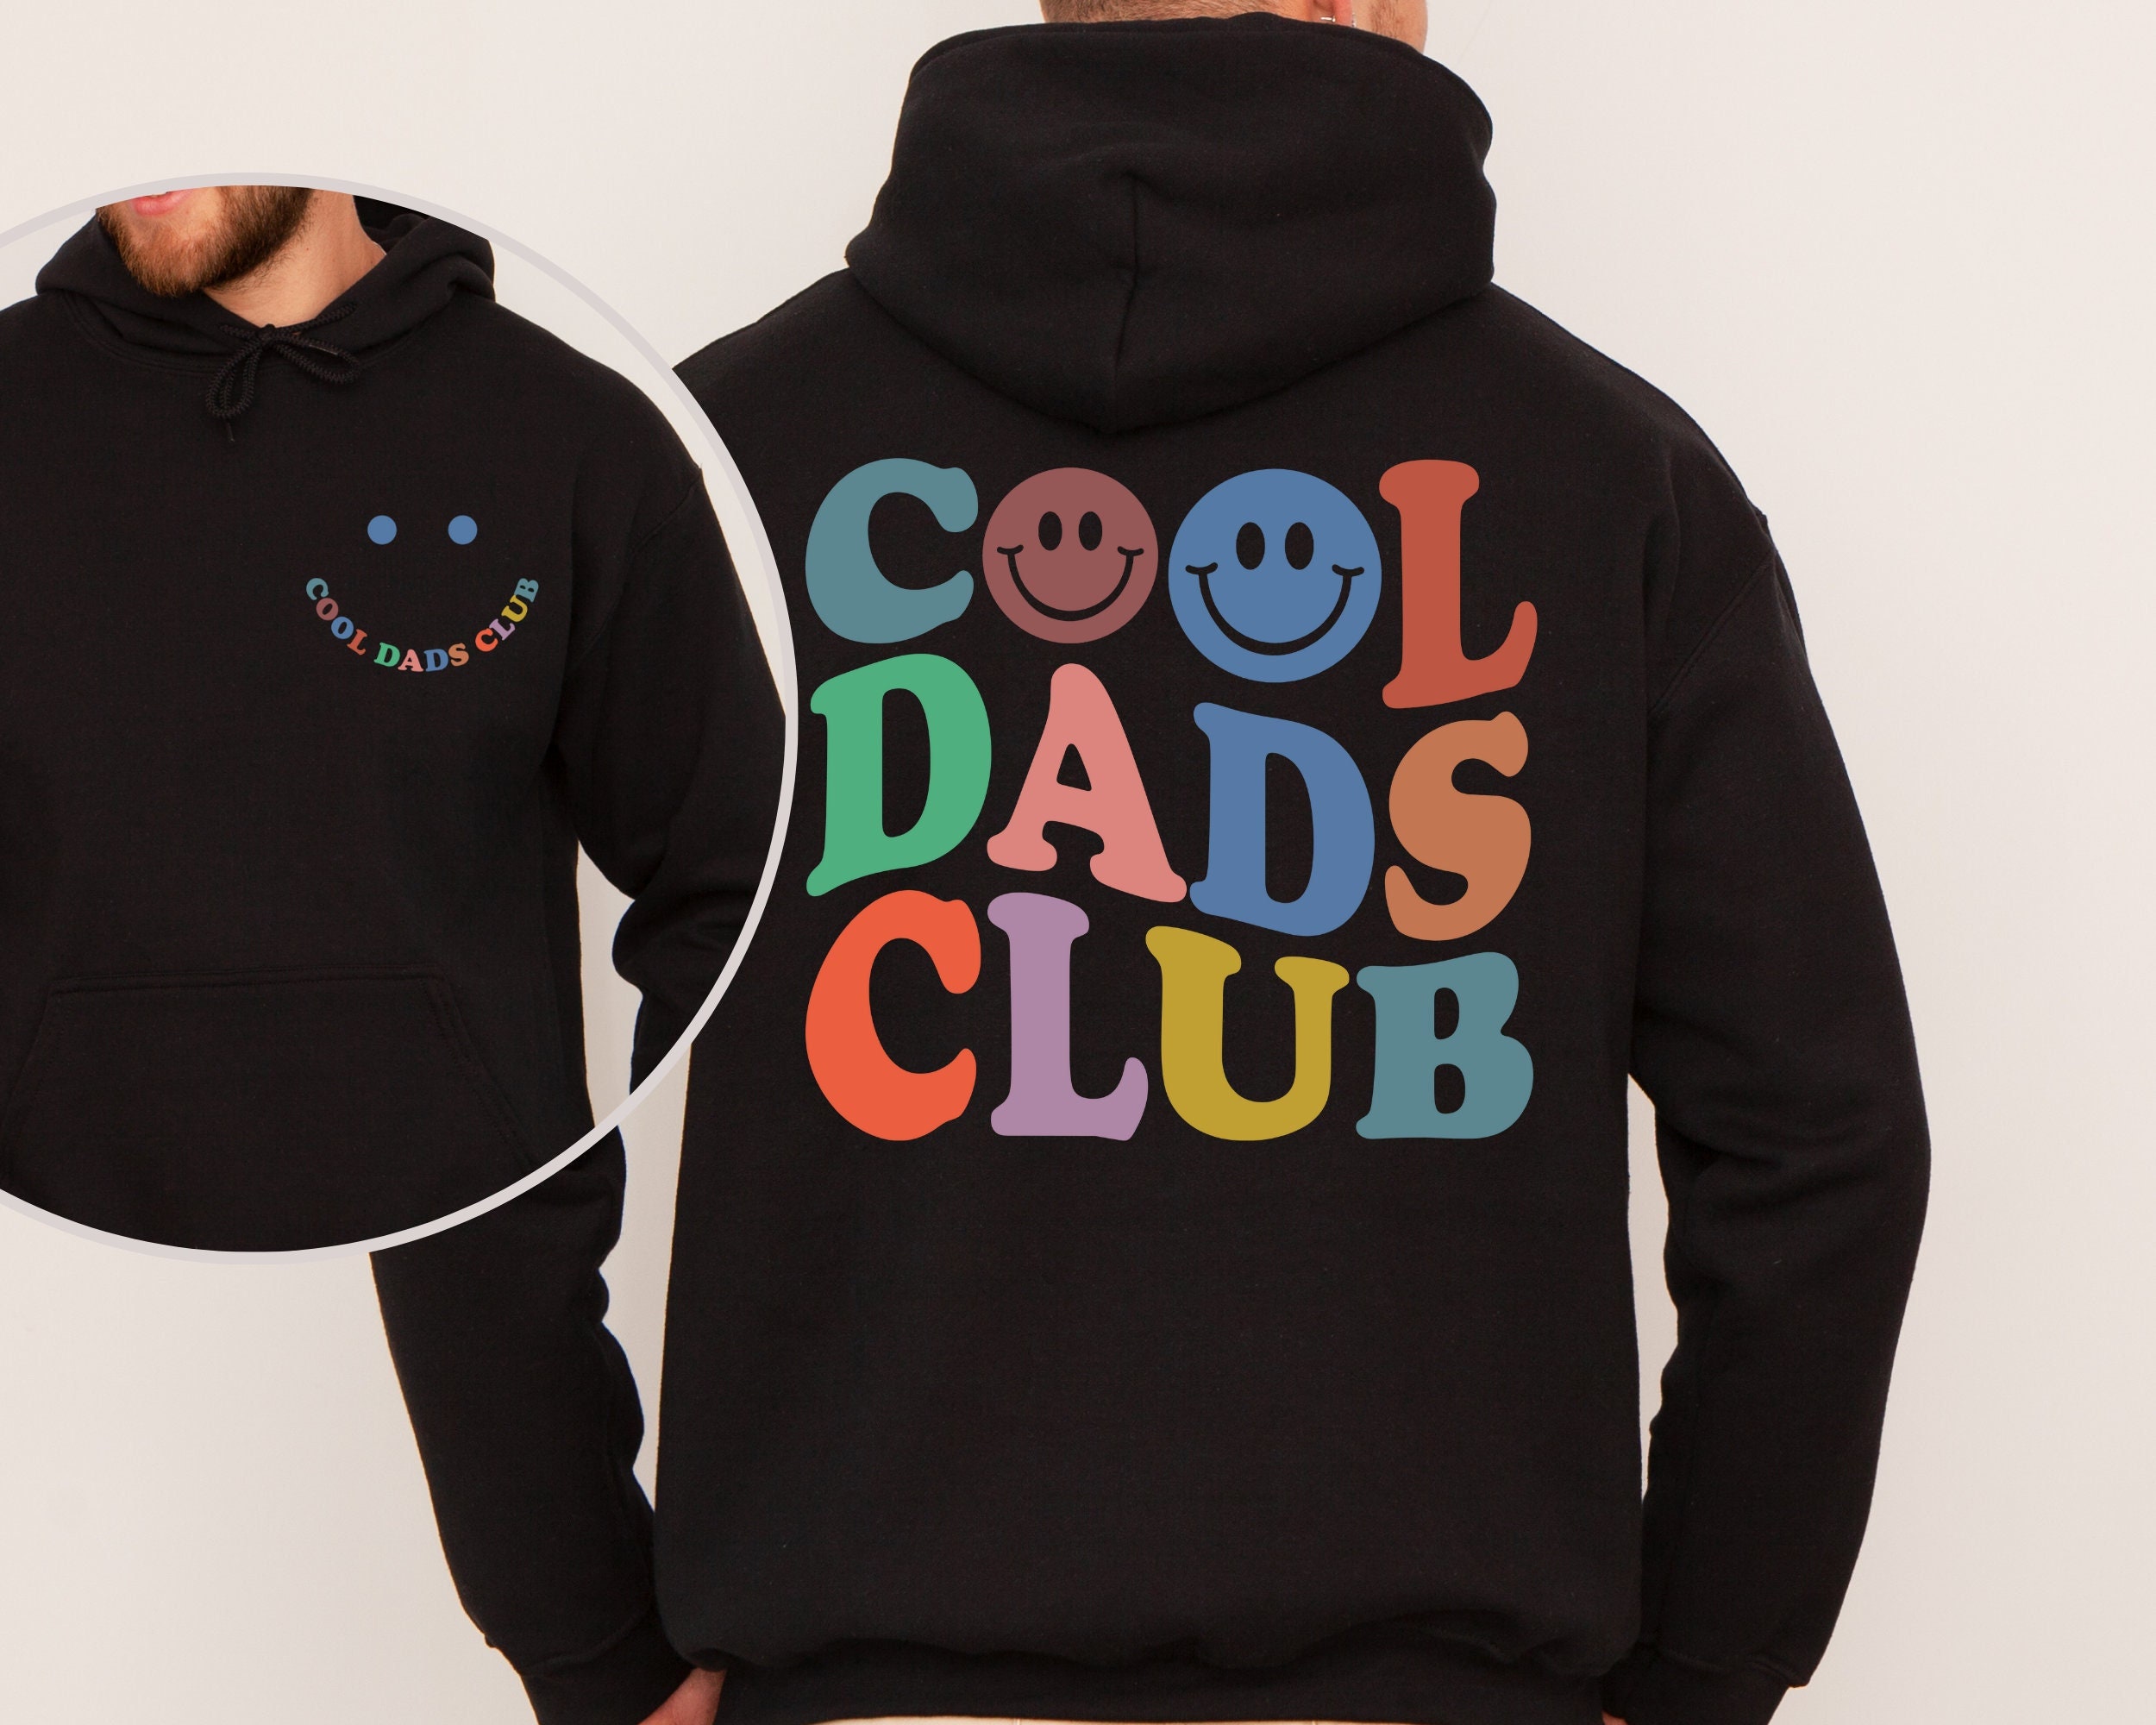 This Dad Is Officially 39 Father Papa Daddy Birthday Pullover Hoodie